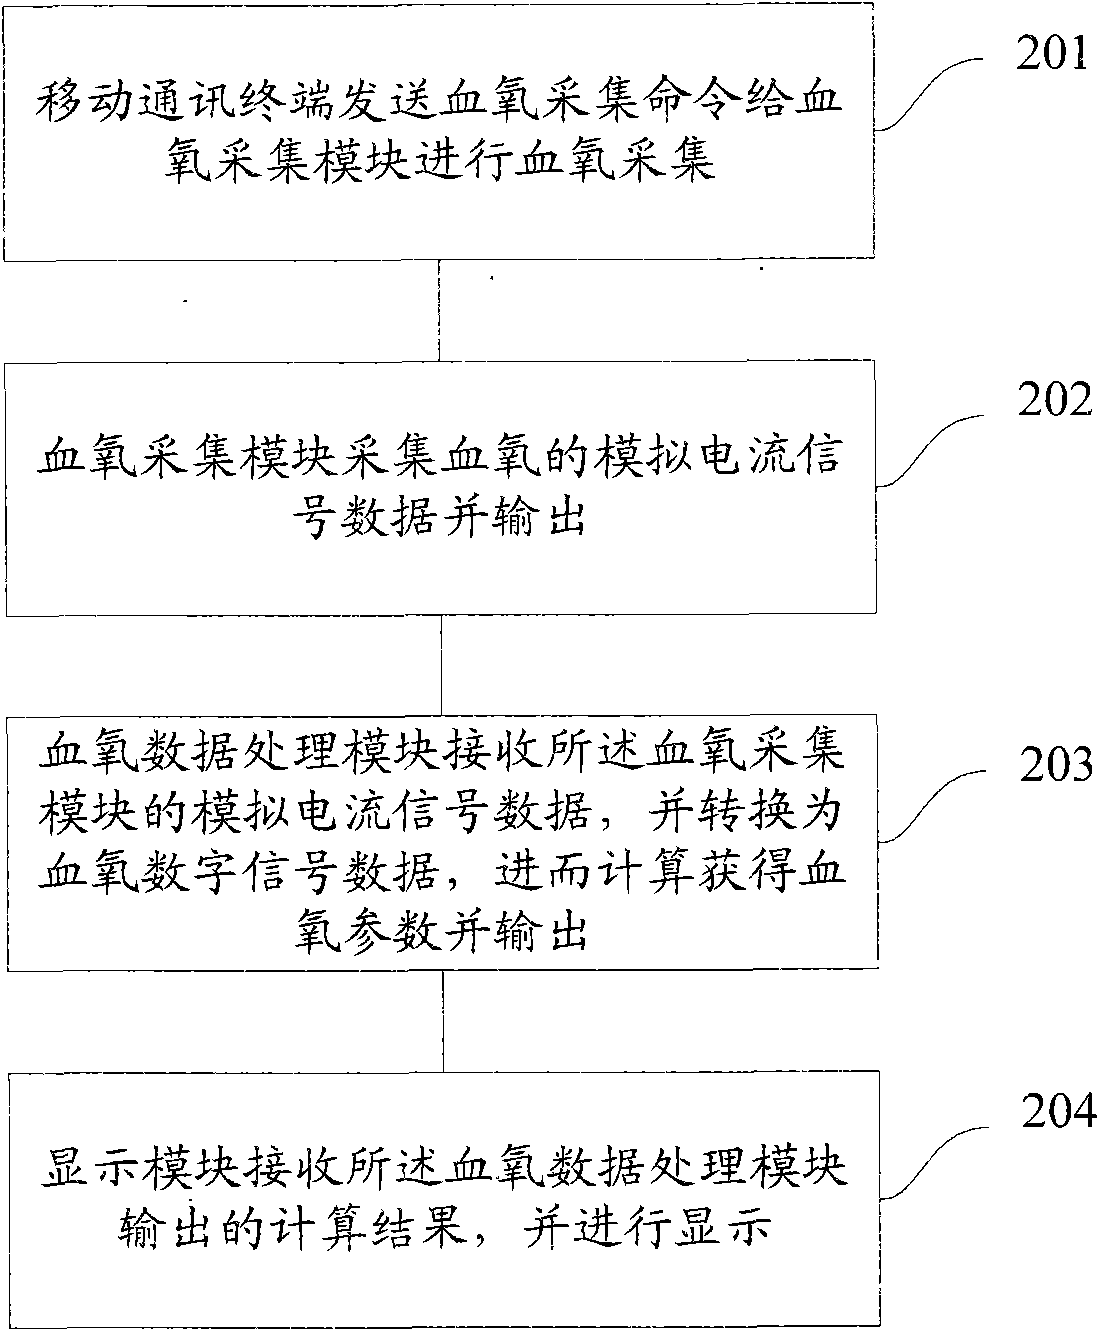 Mobile communication terminal and remote blood oxygen monitoring system